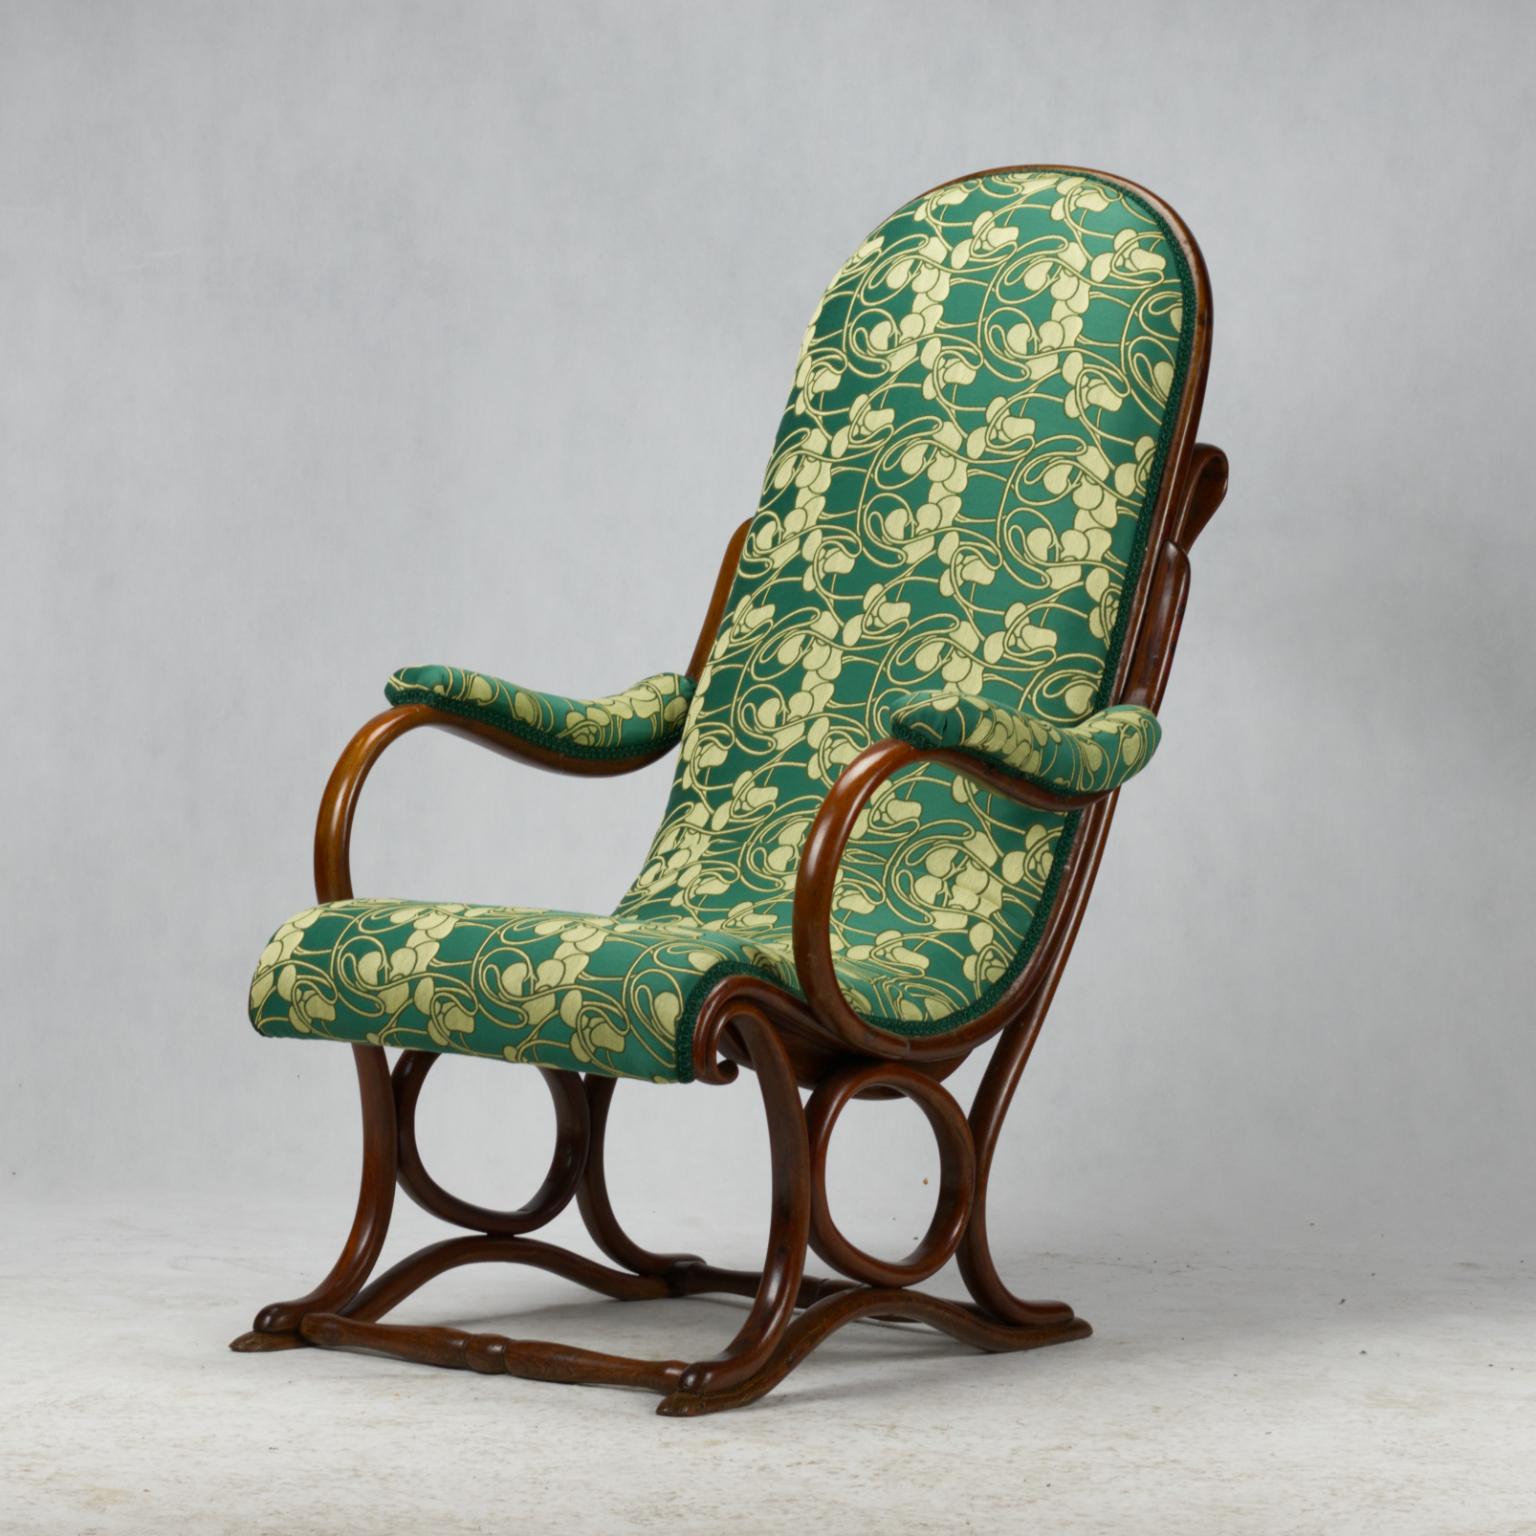 Very rare antique Thonet easy chair no 1 produced by Gebruder Thonet from the late 19th century in a very good condition. New upholstery.

Last picture is from Gebruder Thonet catalogue from 1886.
 